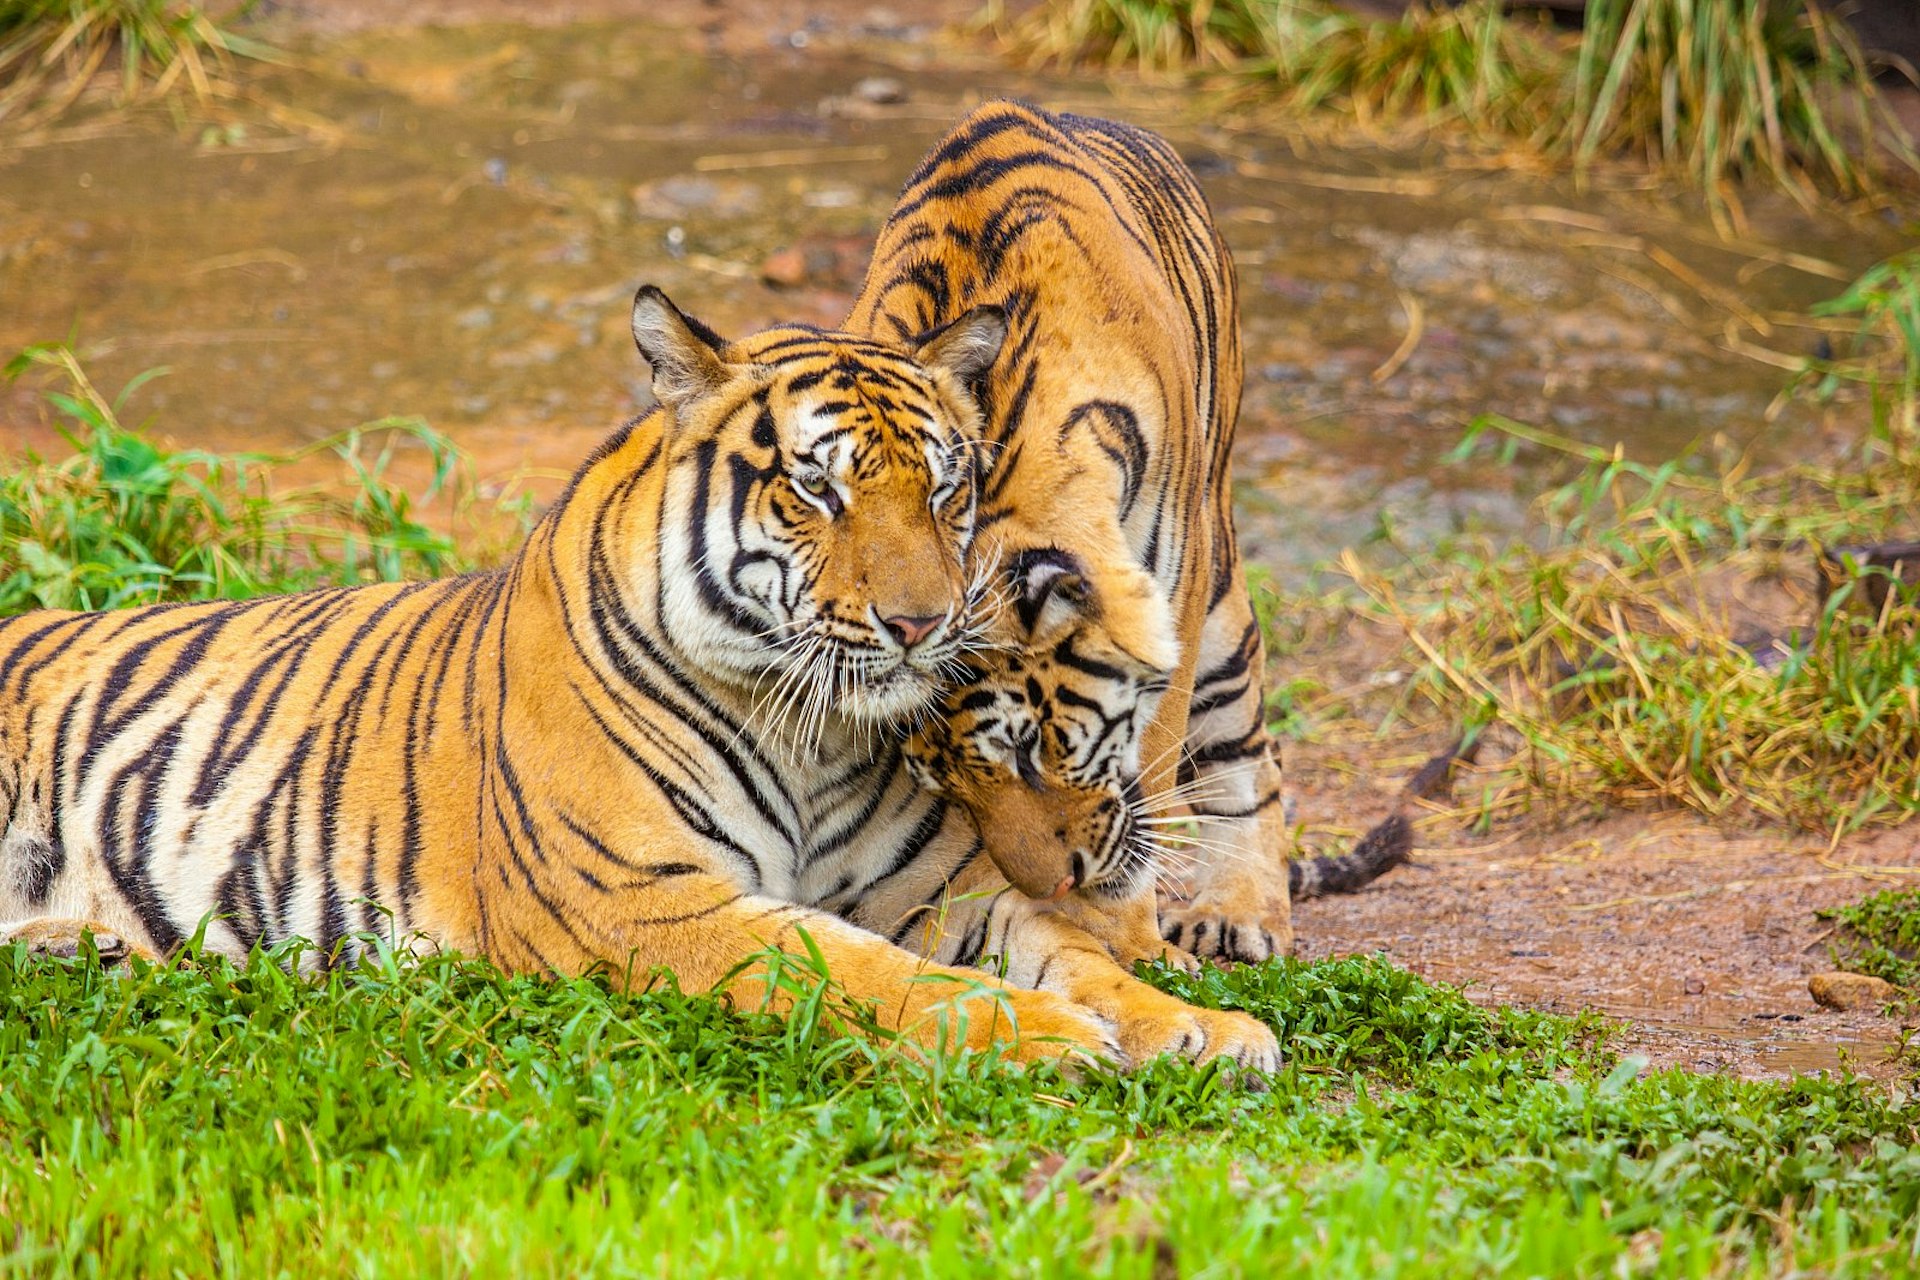 One tiger is lying on marshy grassland; another is cuddling up to it.